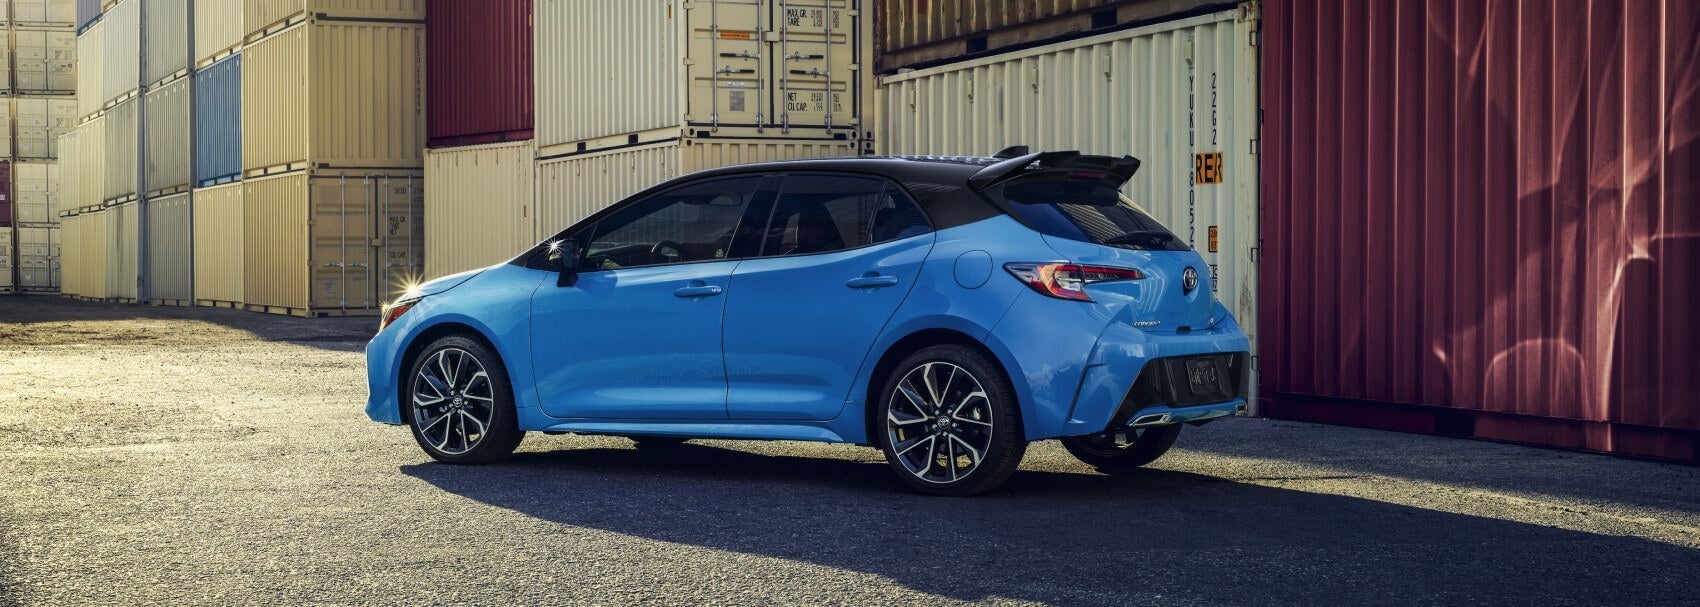 2021 Toyota Corolla Hatchback Review